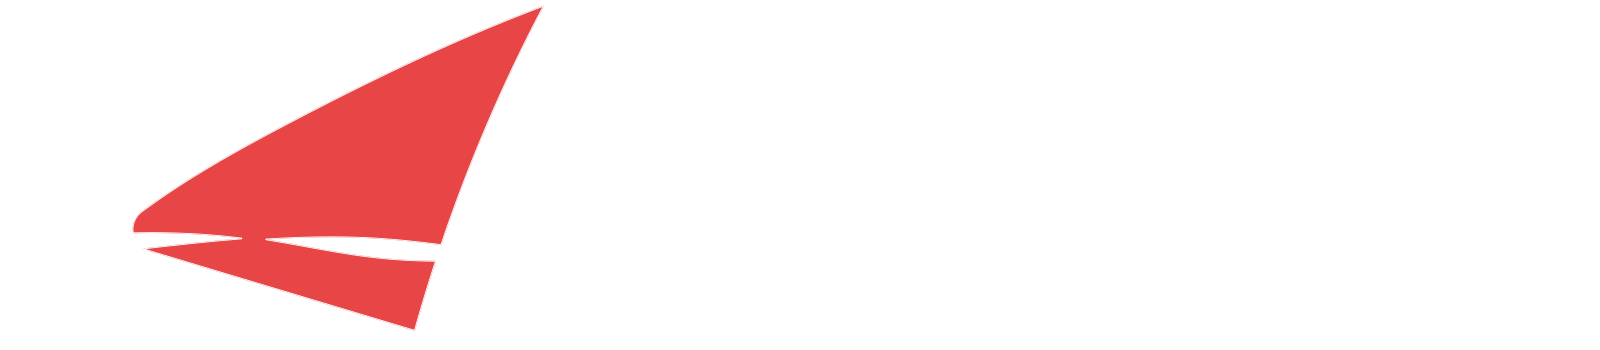 prc inflatable boats 02